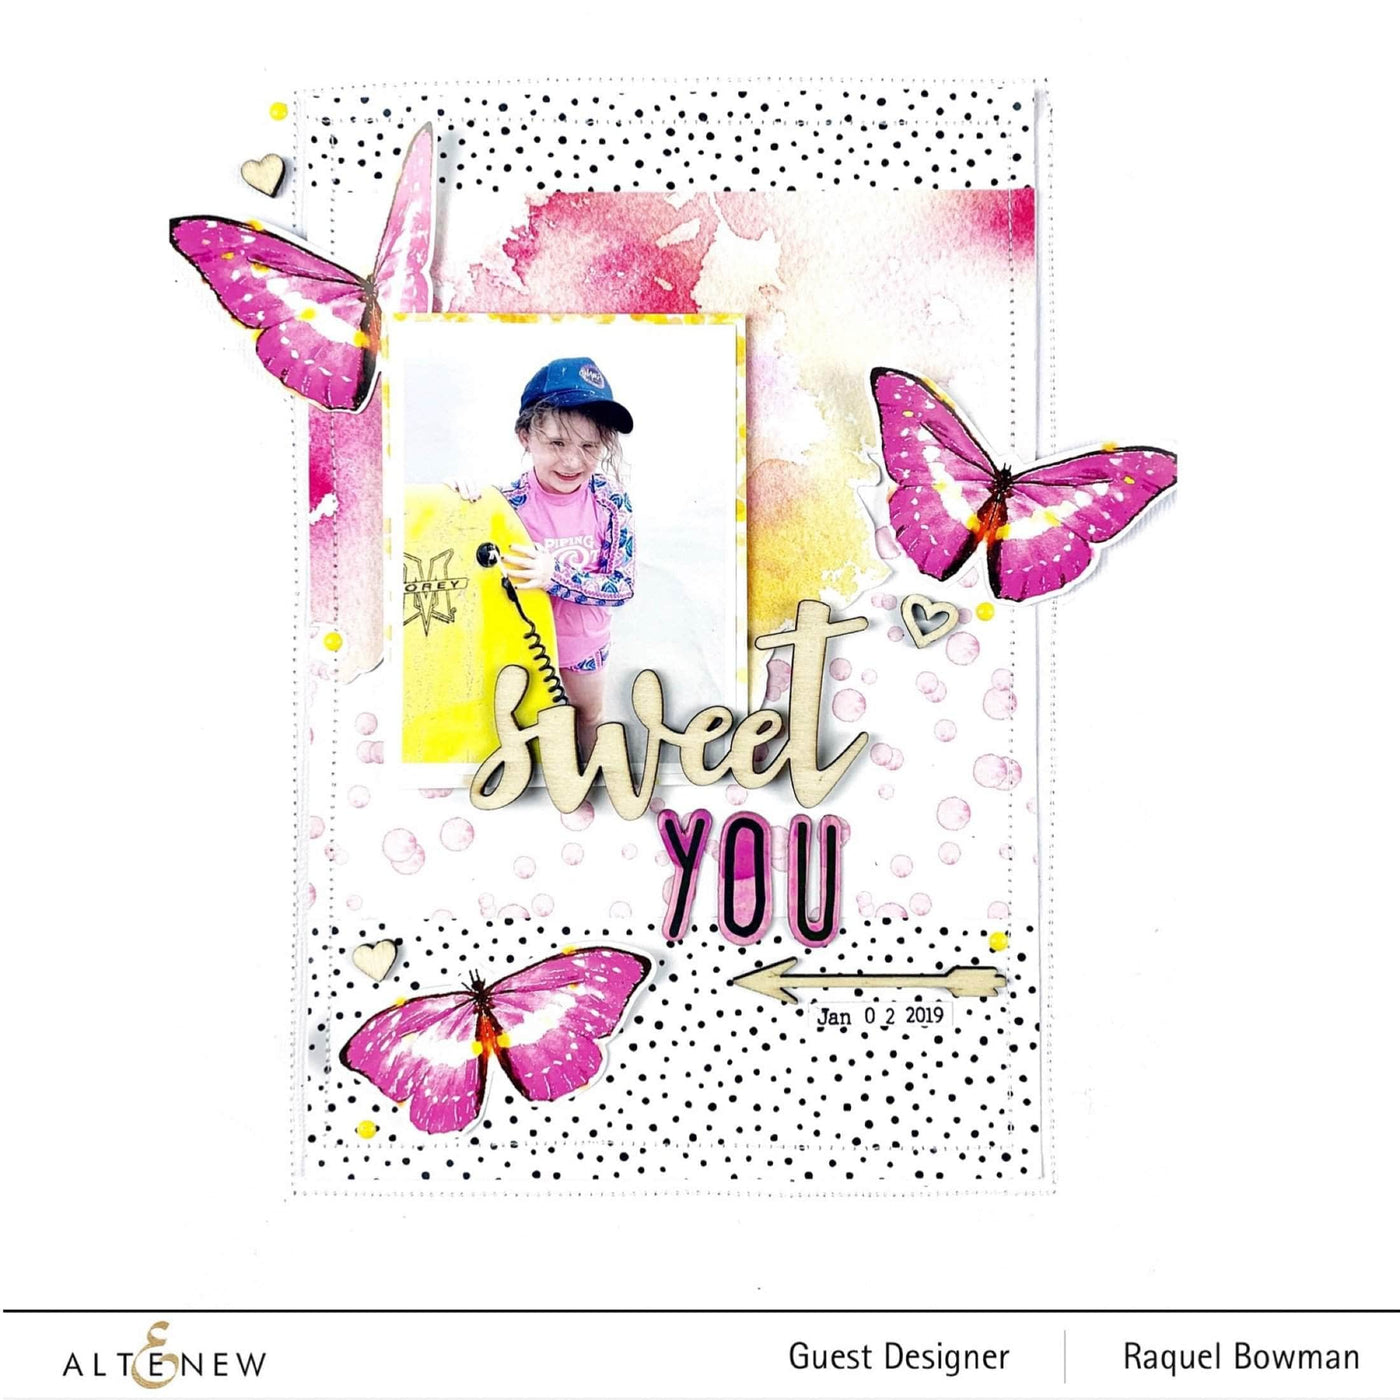 Altenew Embellishments Watercolor Butterfly Cardstock Stickers